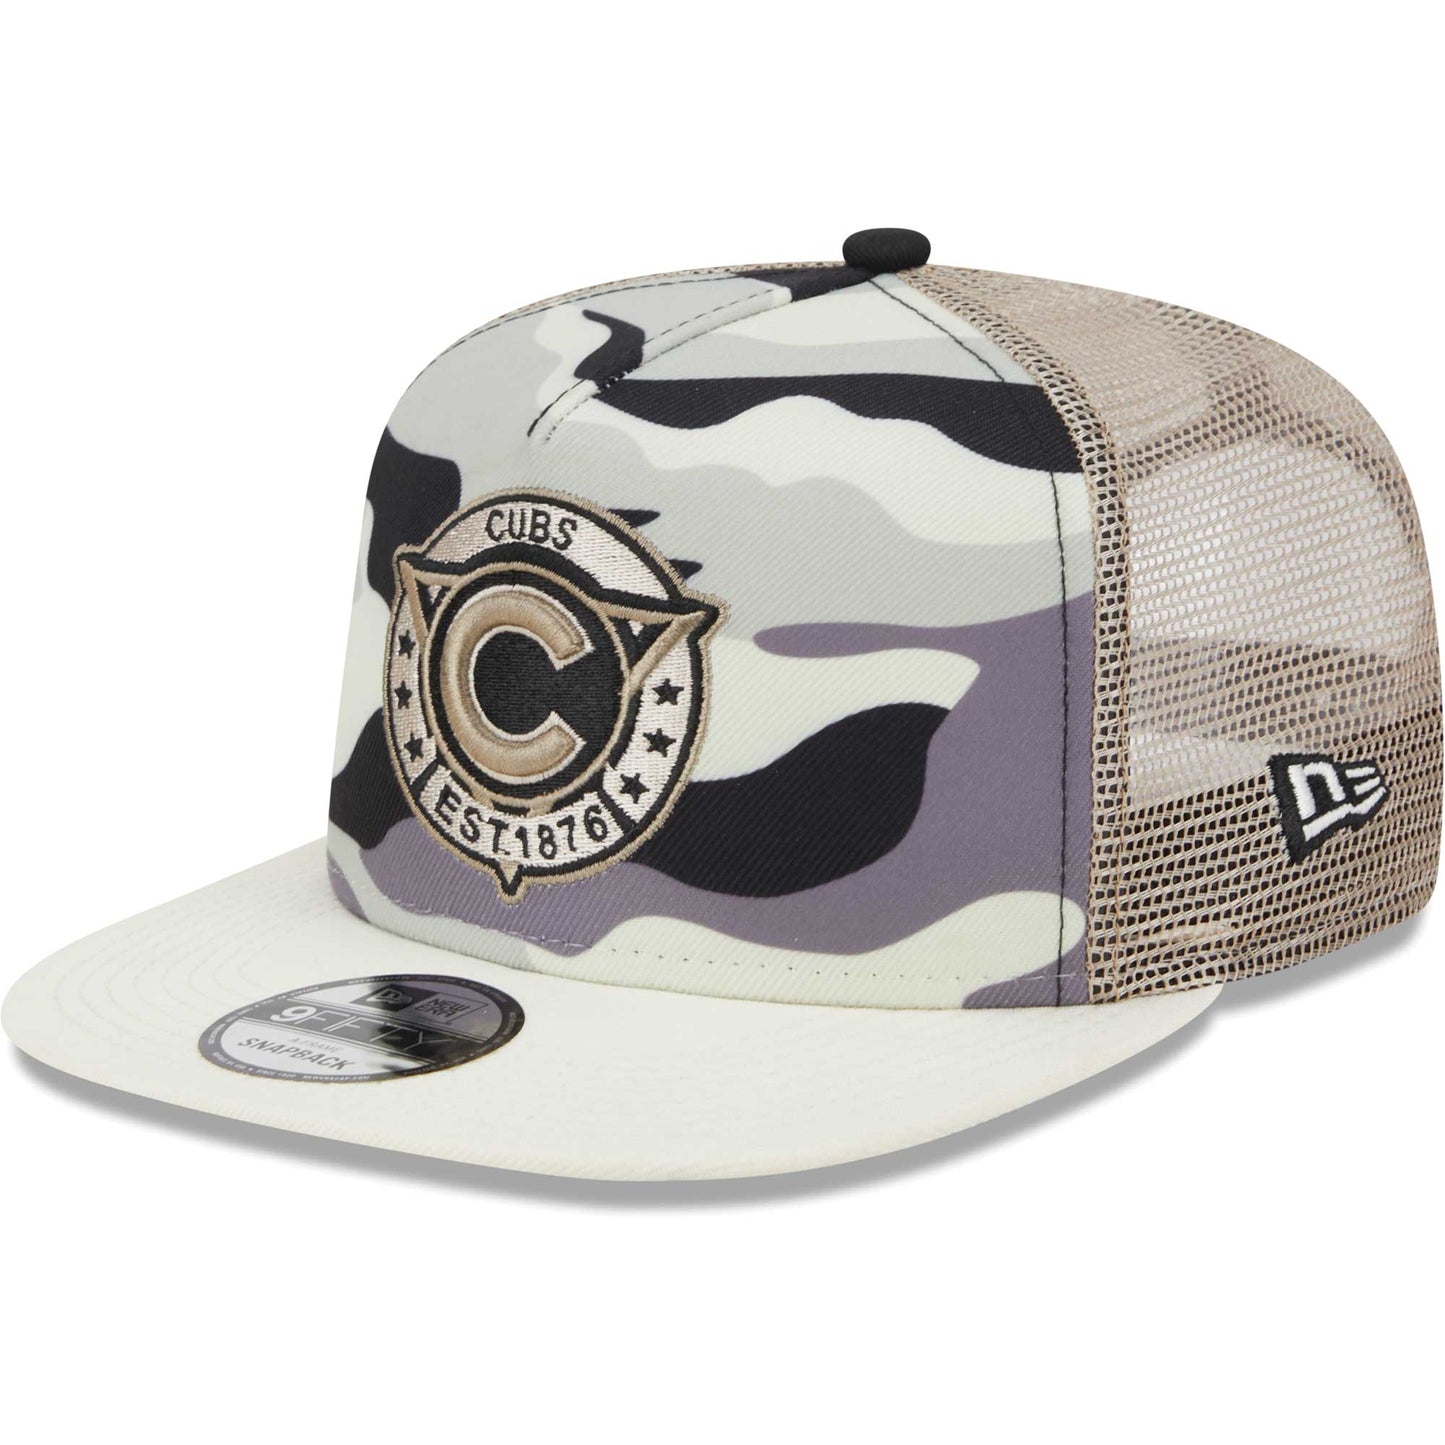 Chicago Cubs New Era Chrome Camo A-Frame 9FIFTY Trucker Snapback Hat - White